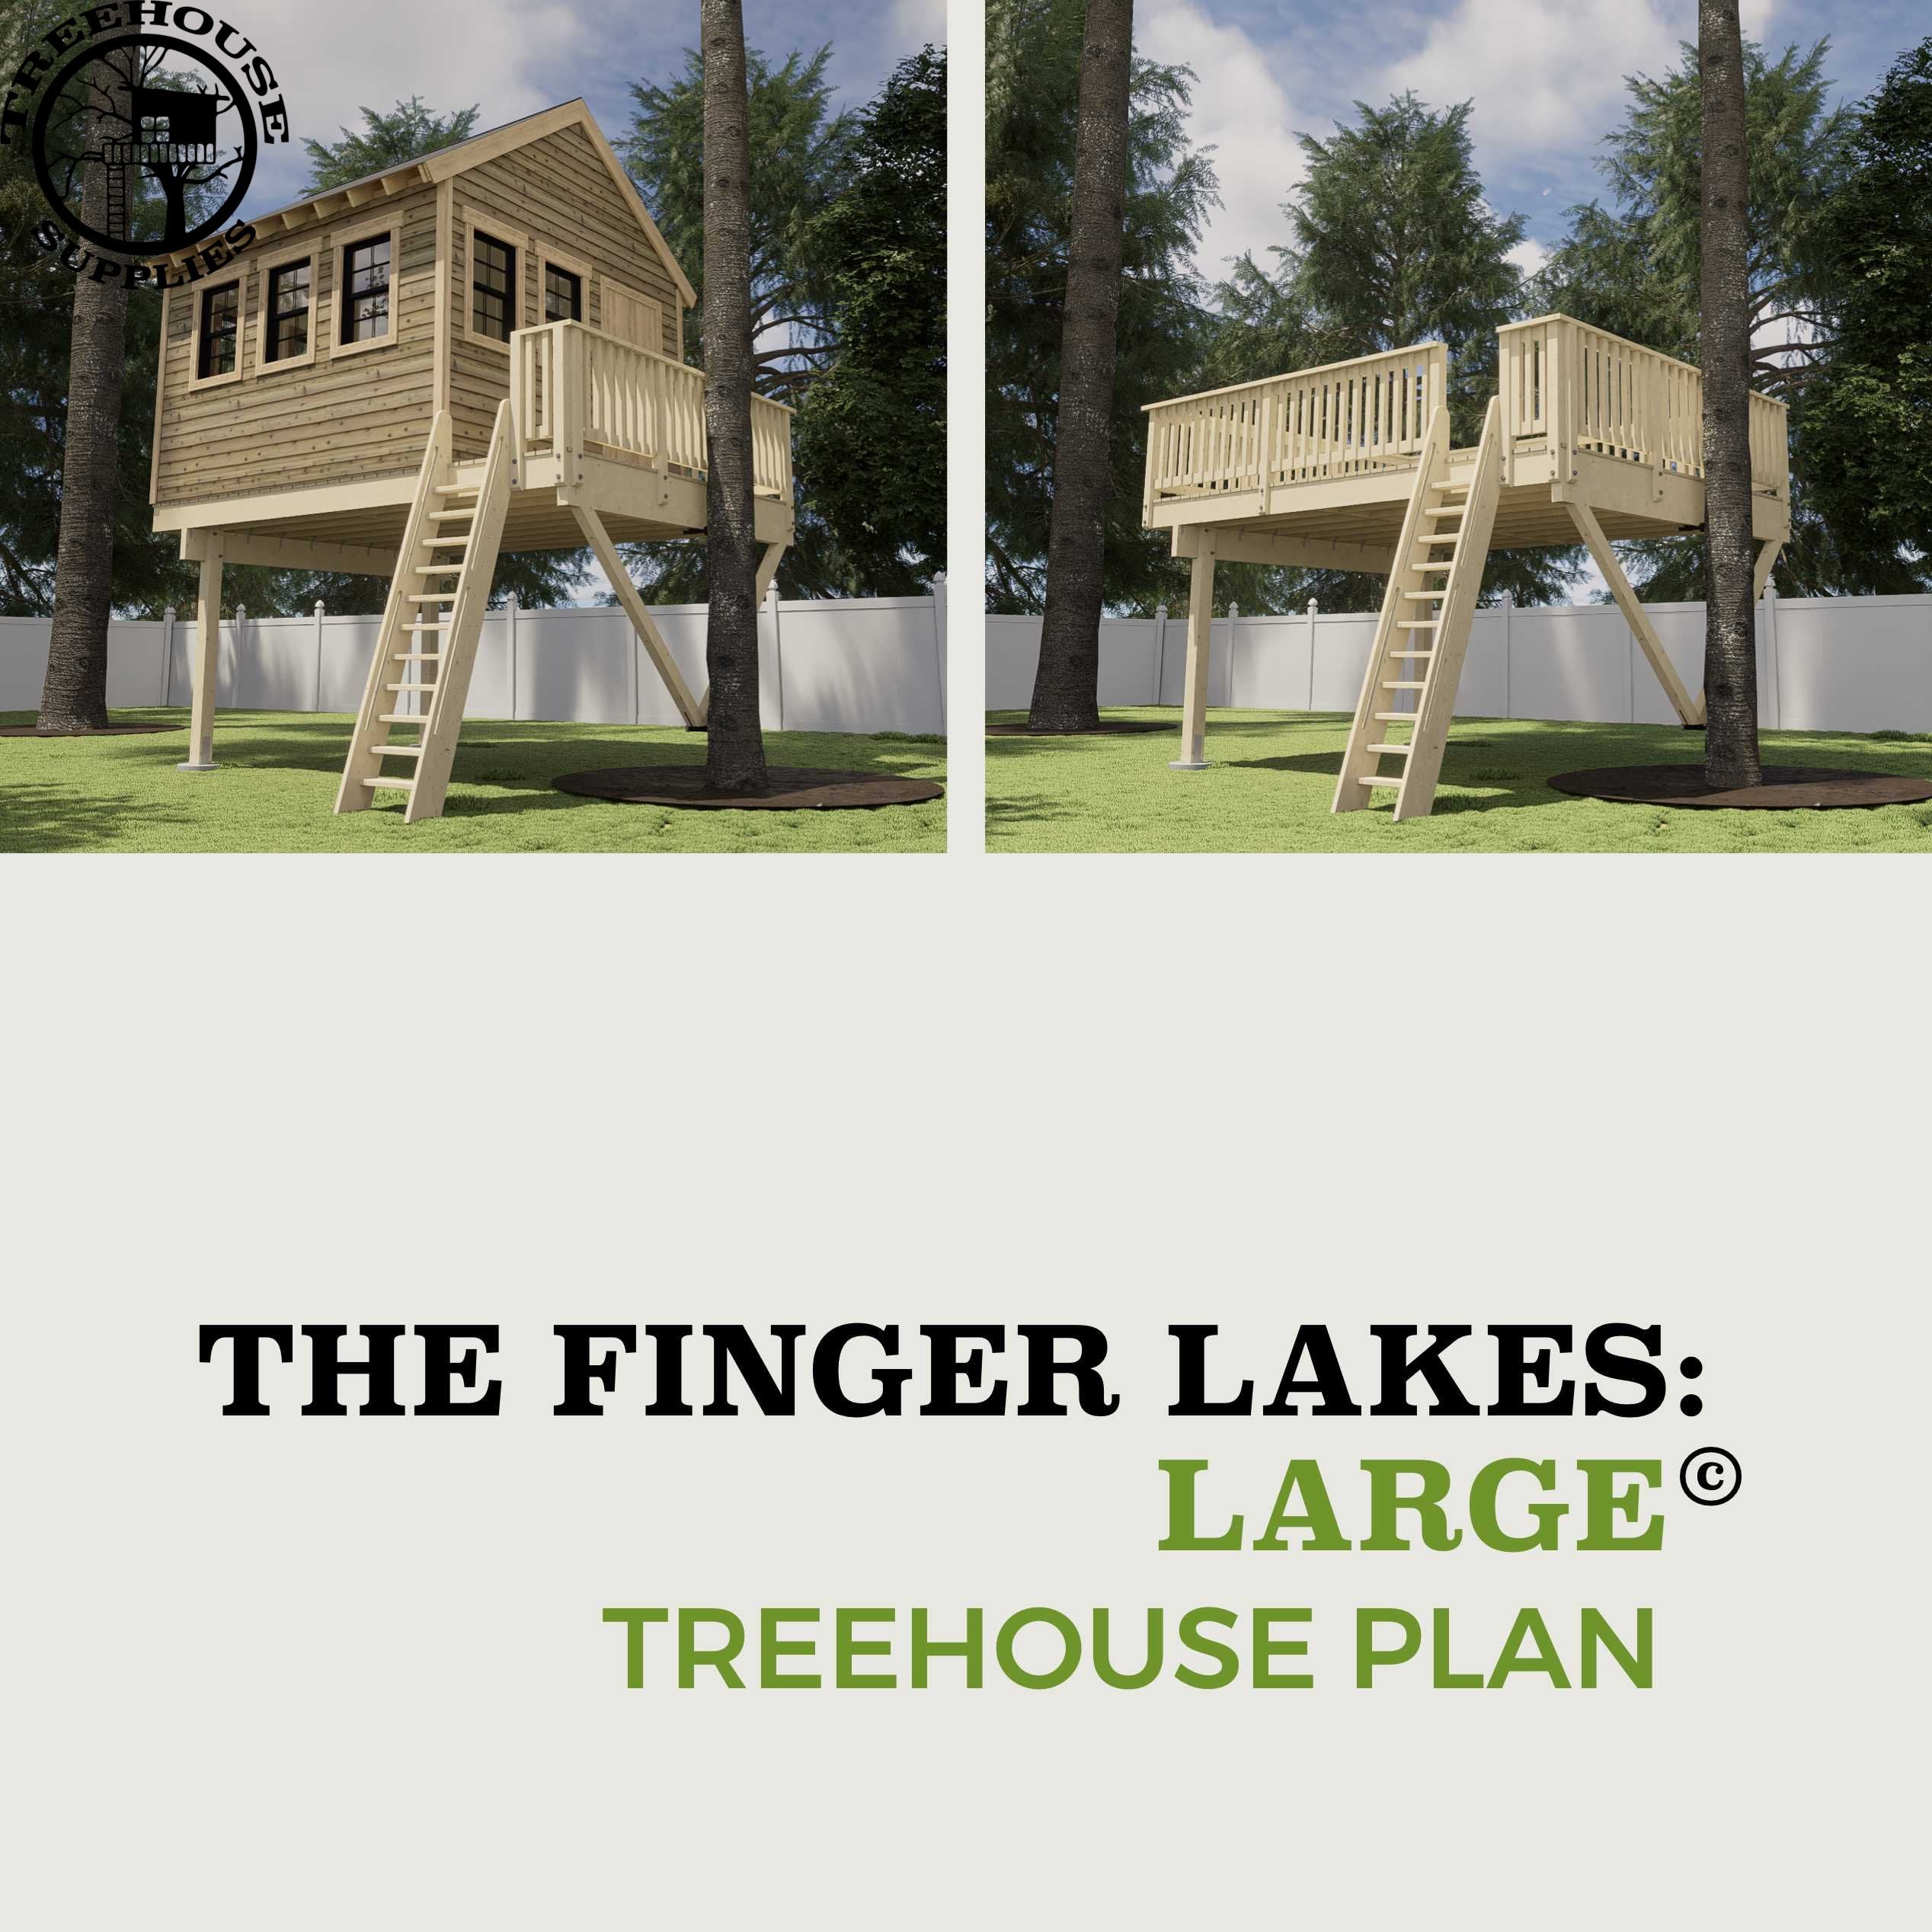 Treehouse Supplies THE FINGER LAKES: LARGE © Treehouse Plan 